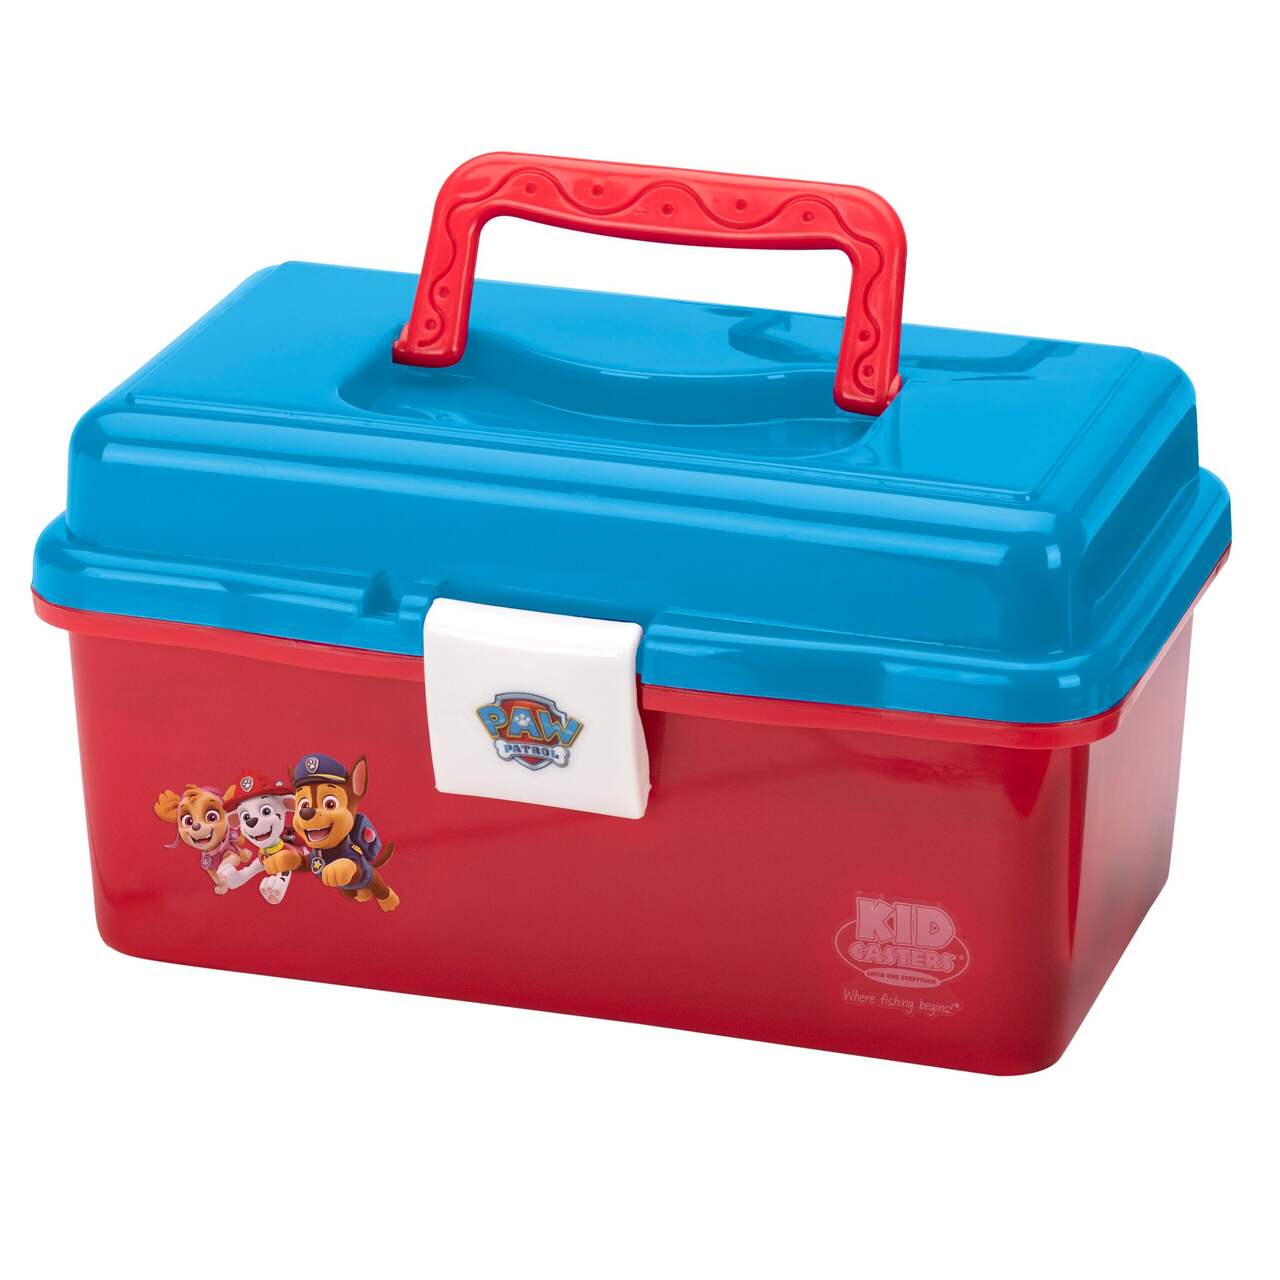 https://media-www.canadiantire.ca/product/playing/fishing/fishing-equipment/0772237/-paw-ptrl-tackle-box--64136145-978f-4ad5-b0af-f700de13b3eb-jpgrendition.jpg?imdensity=1&imwidth=1244&impolicy=mZoom